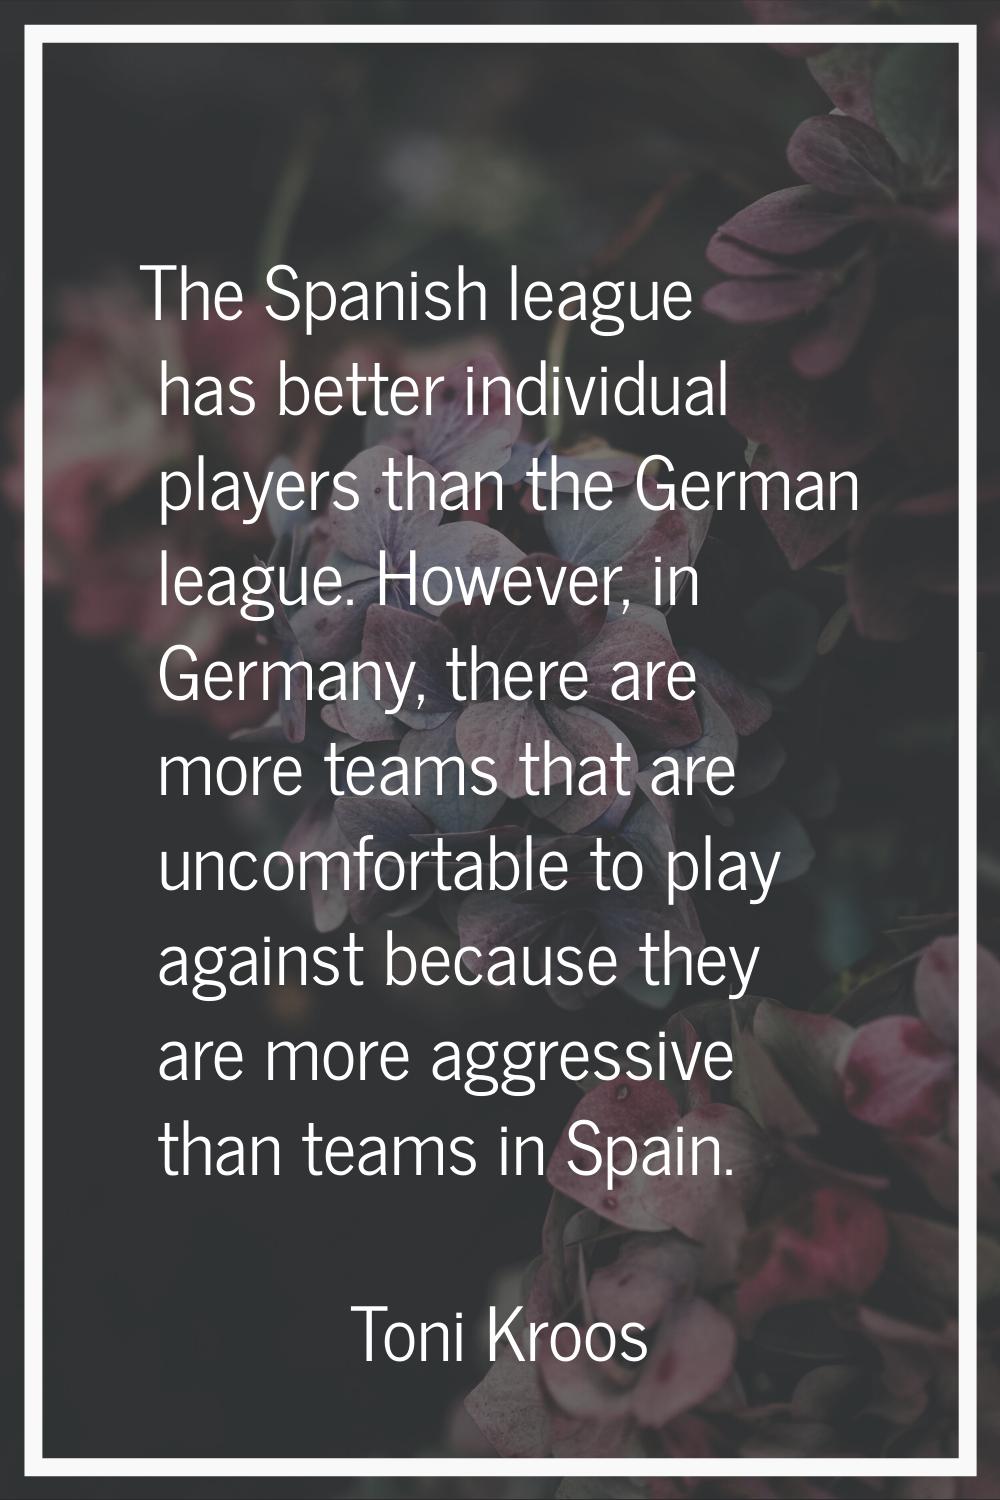 The Spanish league has better individual players than the German league. However, in Germany, there